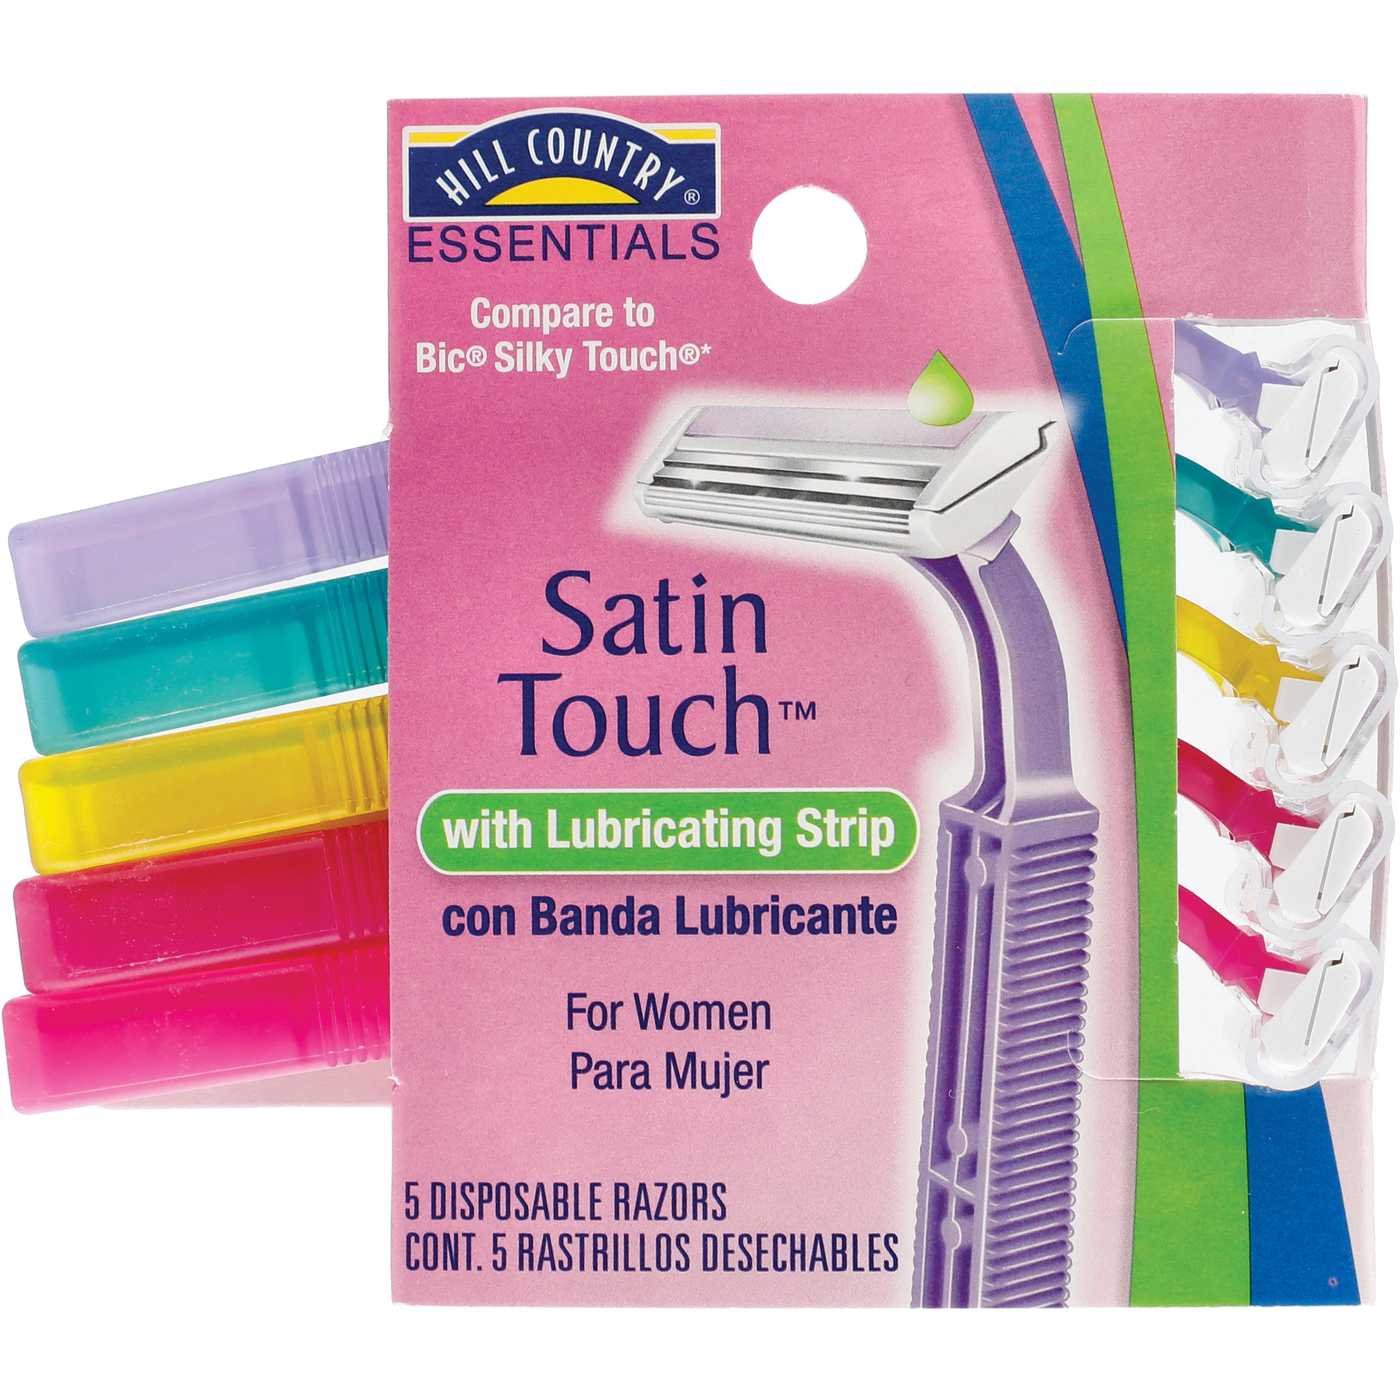 Hill Country Essentials Satin Touch Razors with Lubricating Strip; image 1 of 5